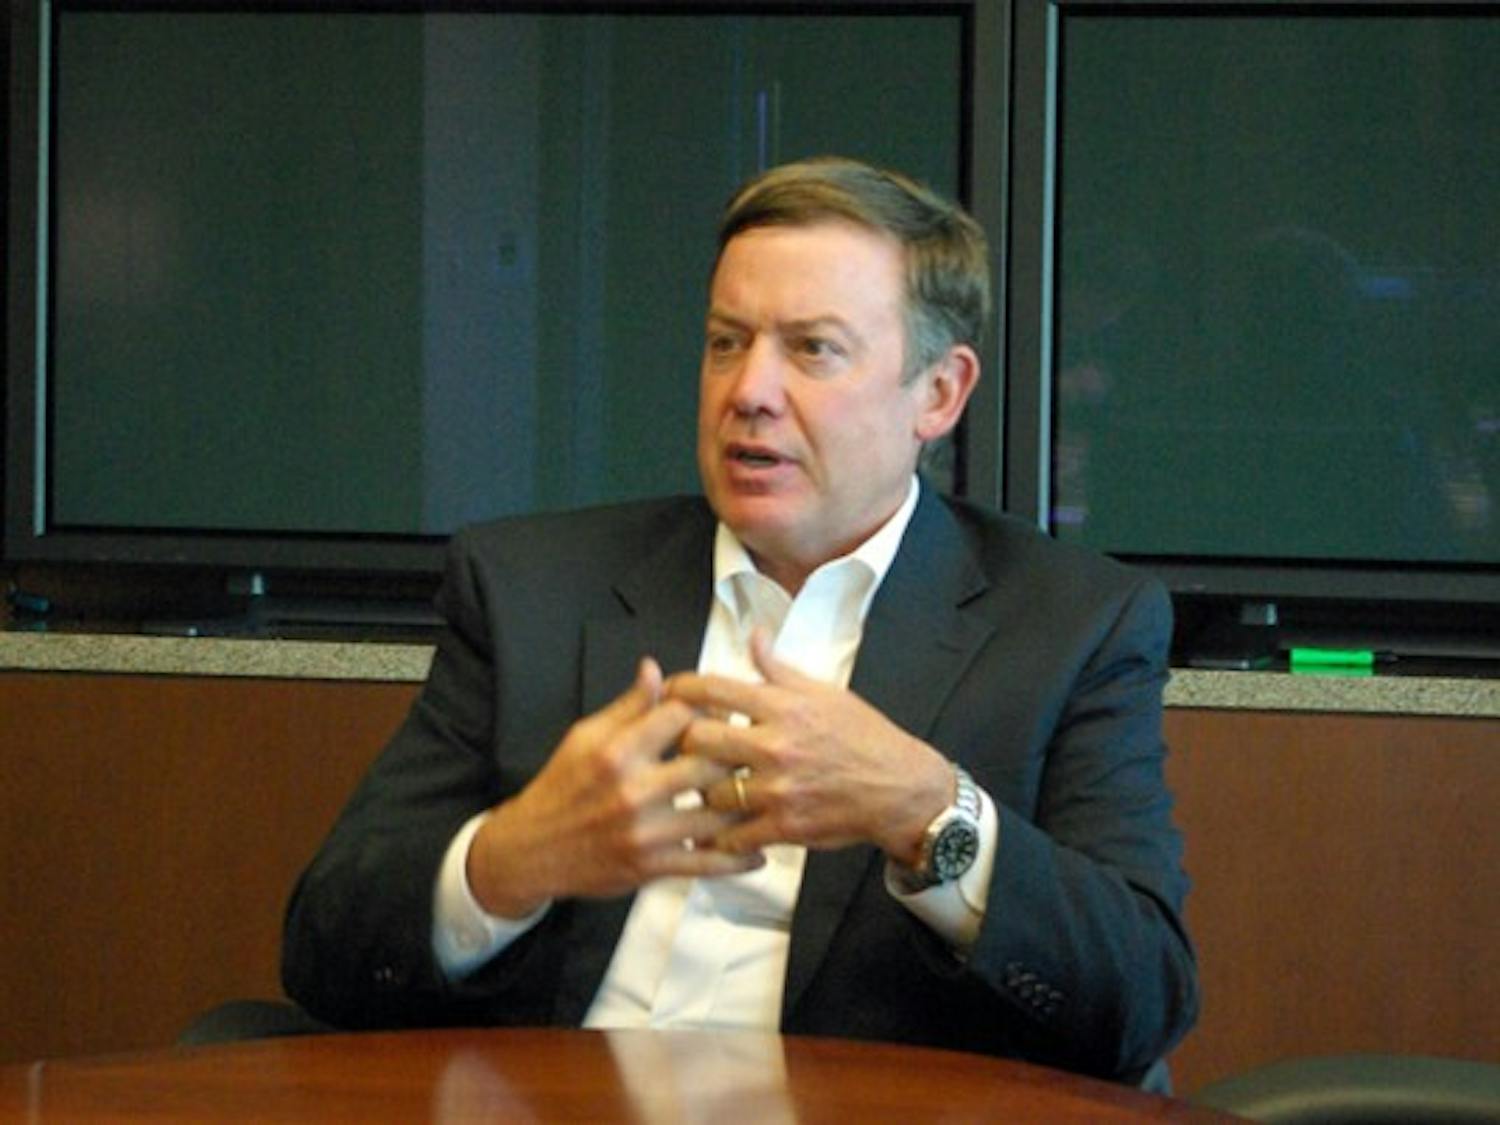 Budget talks: ASU President Michael Crow addresses the potential effects of University budget cuts Tuesday in a meeting with The State Press editorial board. (Photo by Nathan Meacham)